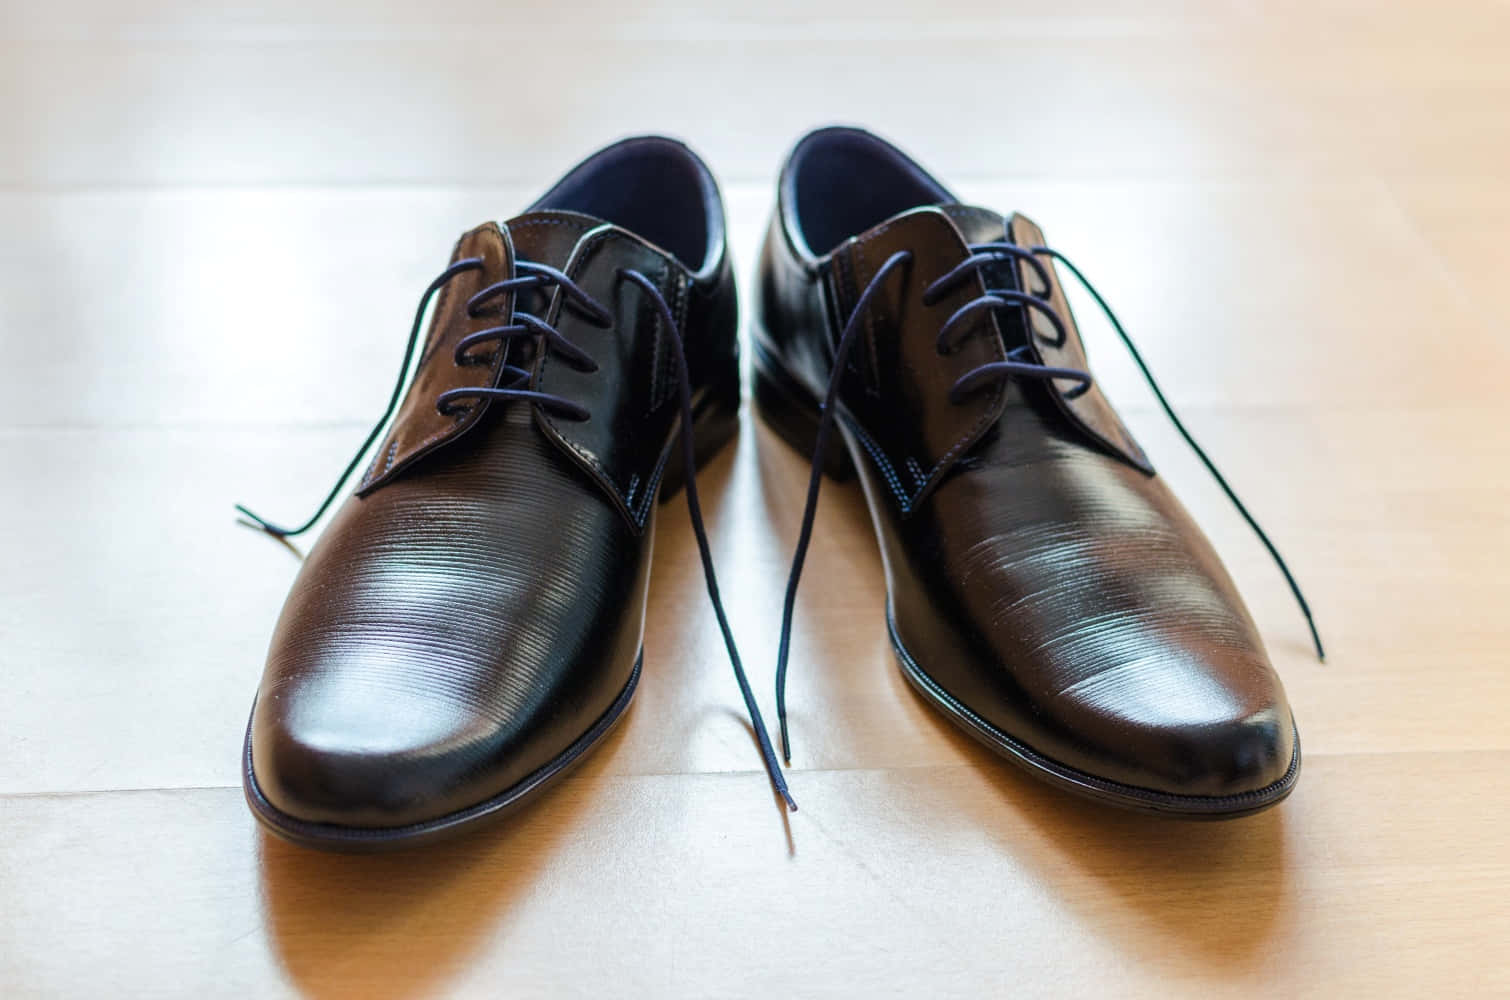 Black Shoes With Blue Laces On A Wooden Floor